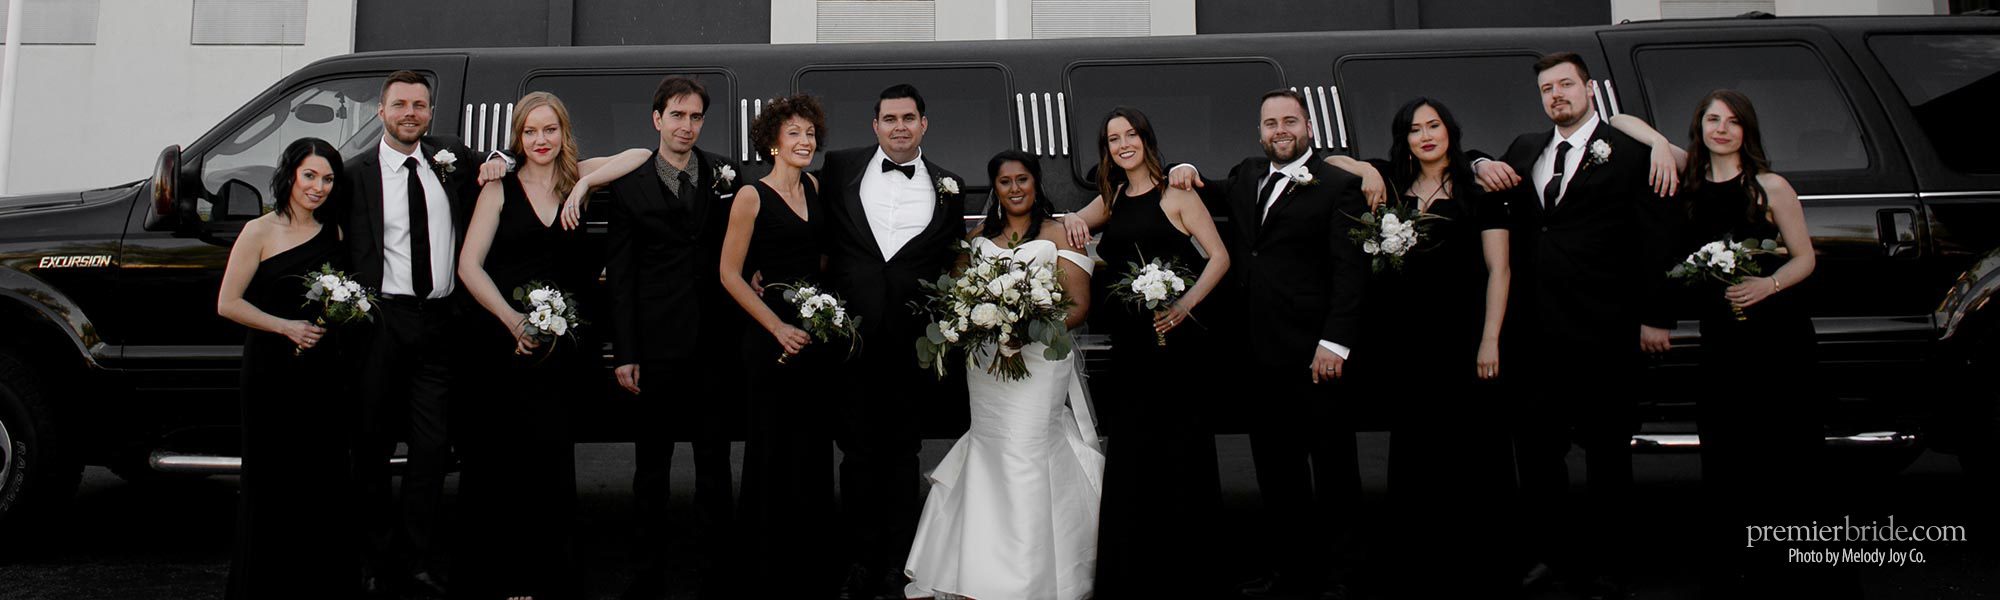 Transportation services by Heritage Limousine, Photo by MelodyJoy.co